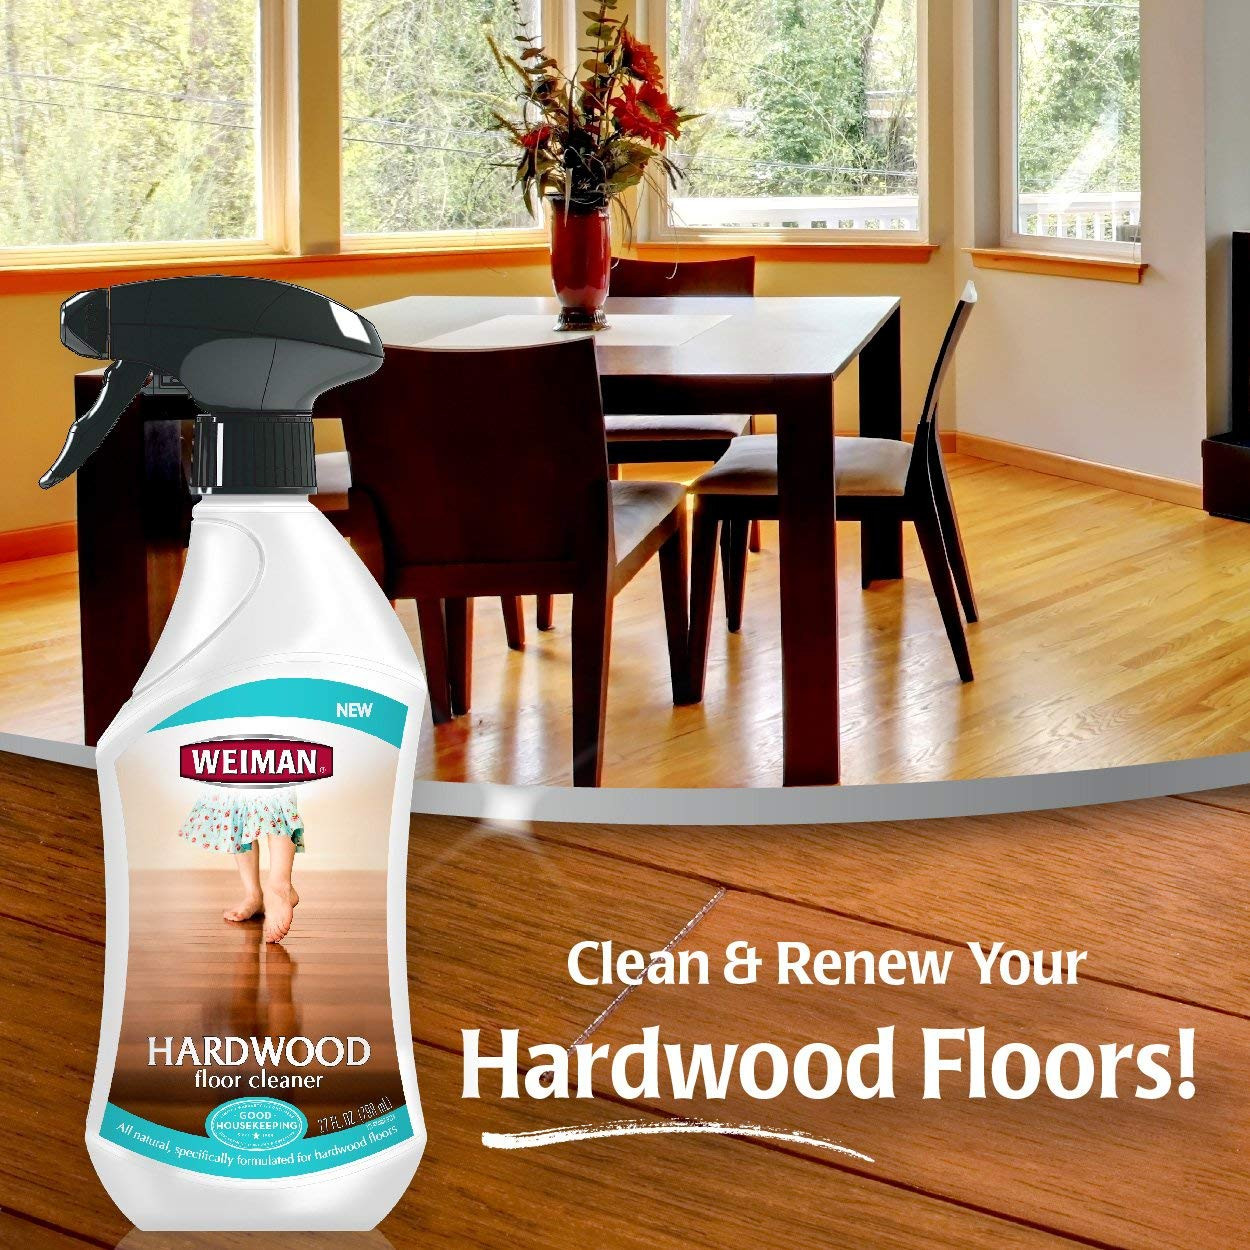 engineered hardwood flooring ratings of amazon com weiman hardwood floor cleaner surface safe no harsh regarding amazon com weiman hardwood floor cleaner surface safe no harsh scent safe for use around kids and pets residue free 27 oz trigger home kitchen